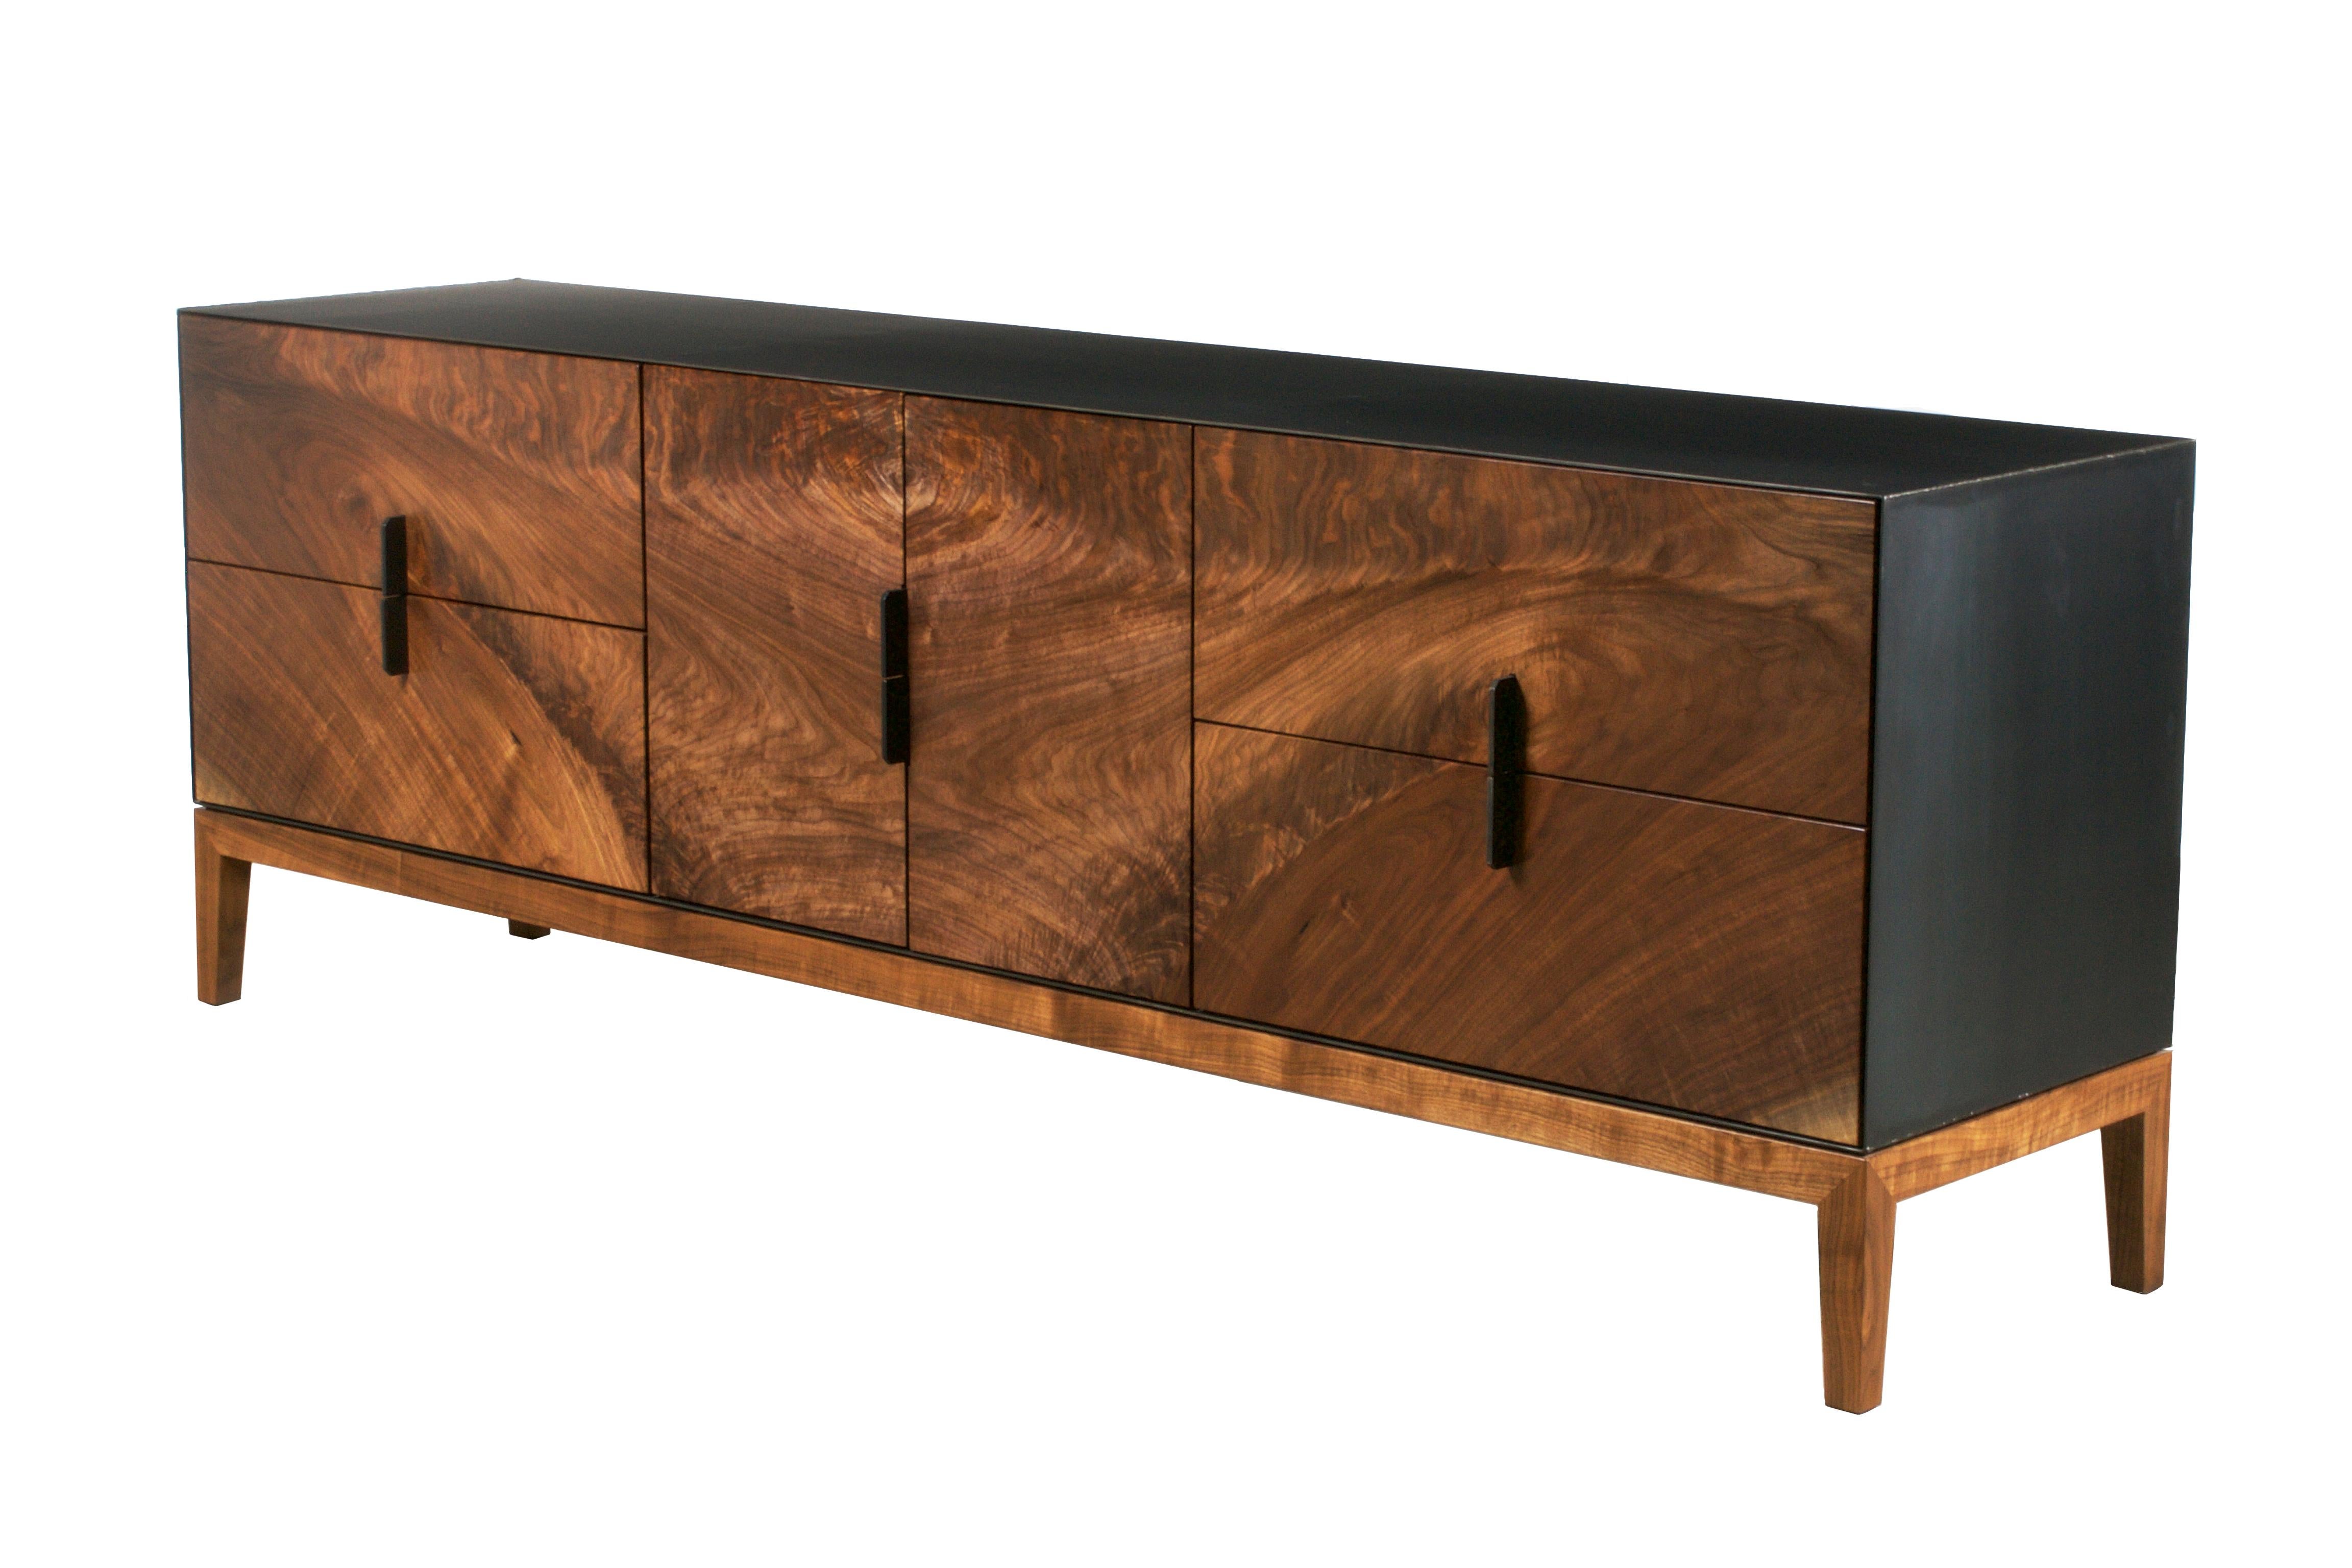 Bookmatched pieces of highly figured solid walnut make up the front of the limited edition taper series media cabinet. Center doors open to reveal electronics storage, complete with cable management, while two pairs of drawers store media on either